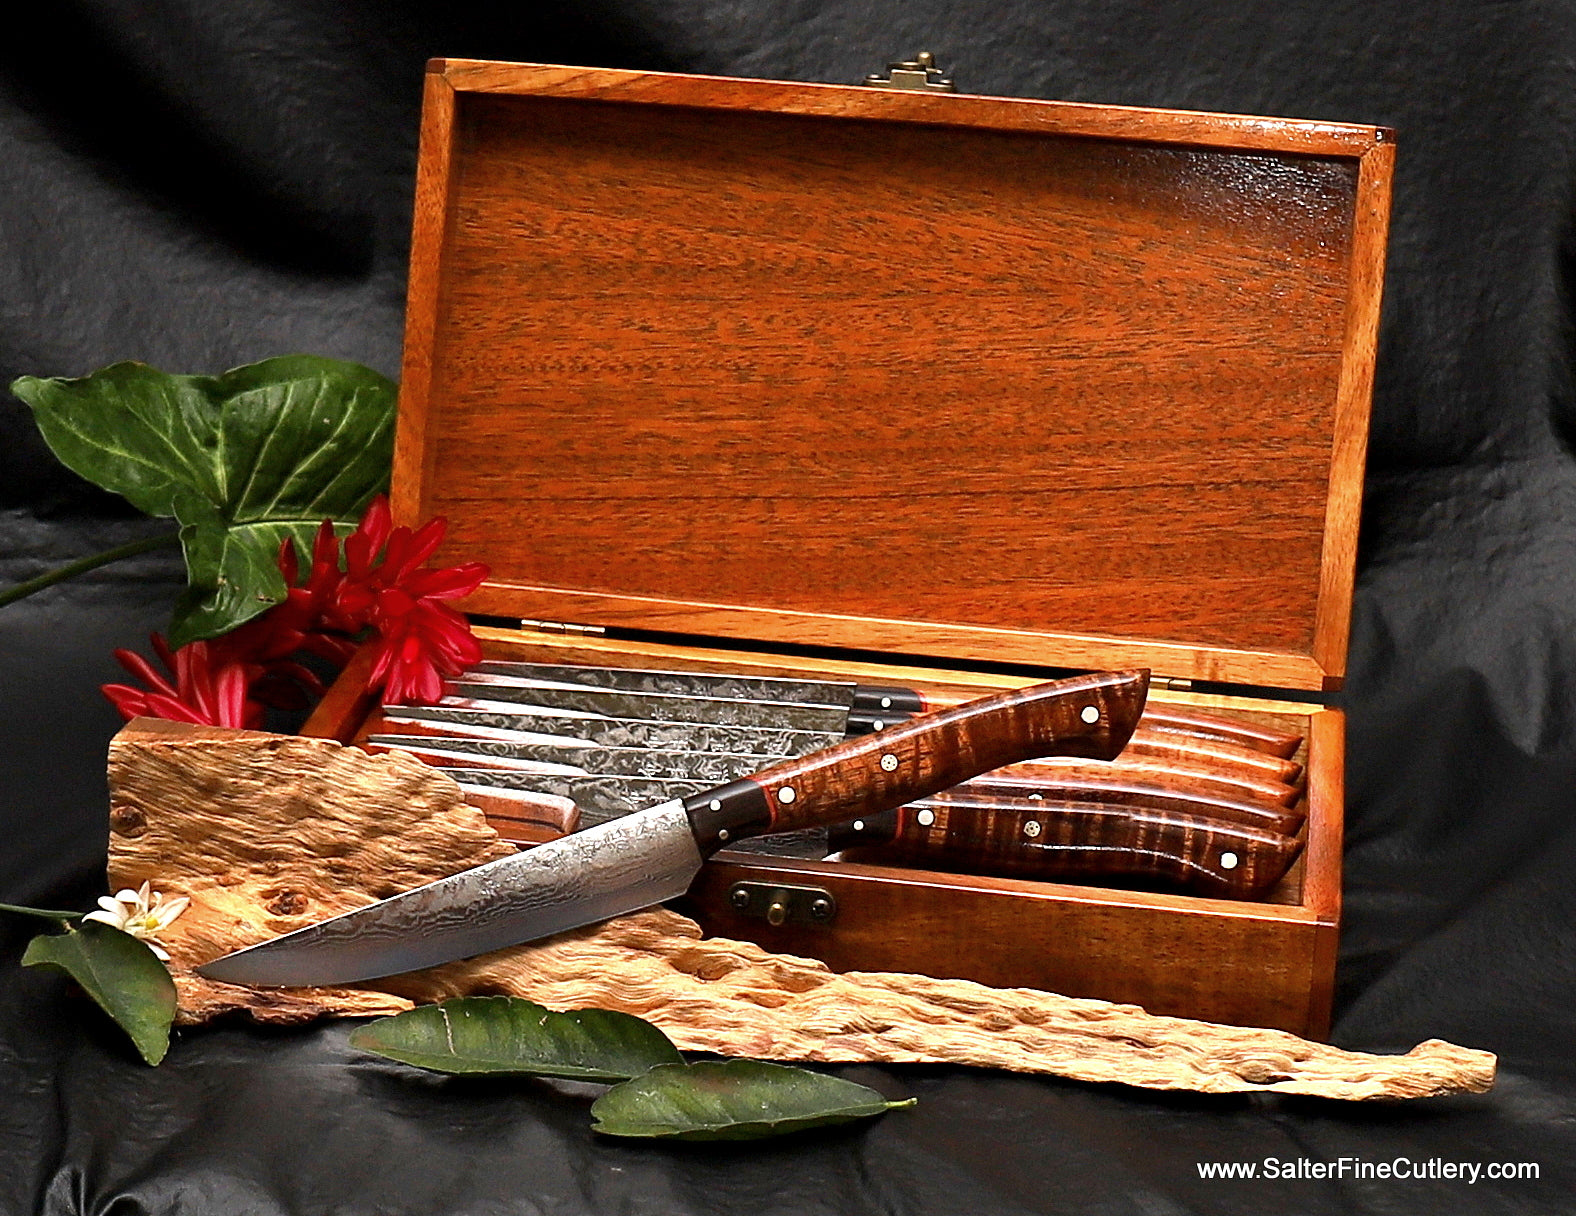 https://cdn.shopify.com/s/files/1/0993/8330/files/6-piece_luxury_steak_knife_set_in_gift_storage_box_handcrafted_in_Hawaii_from_Salter_Fine_Cutlery.jpg?v=1620262077